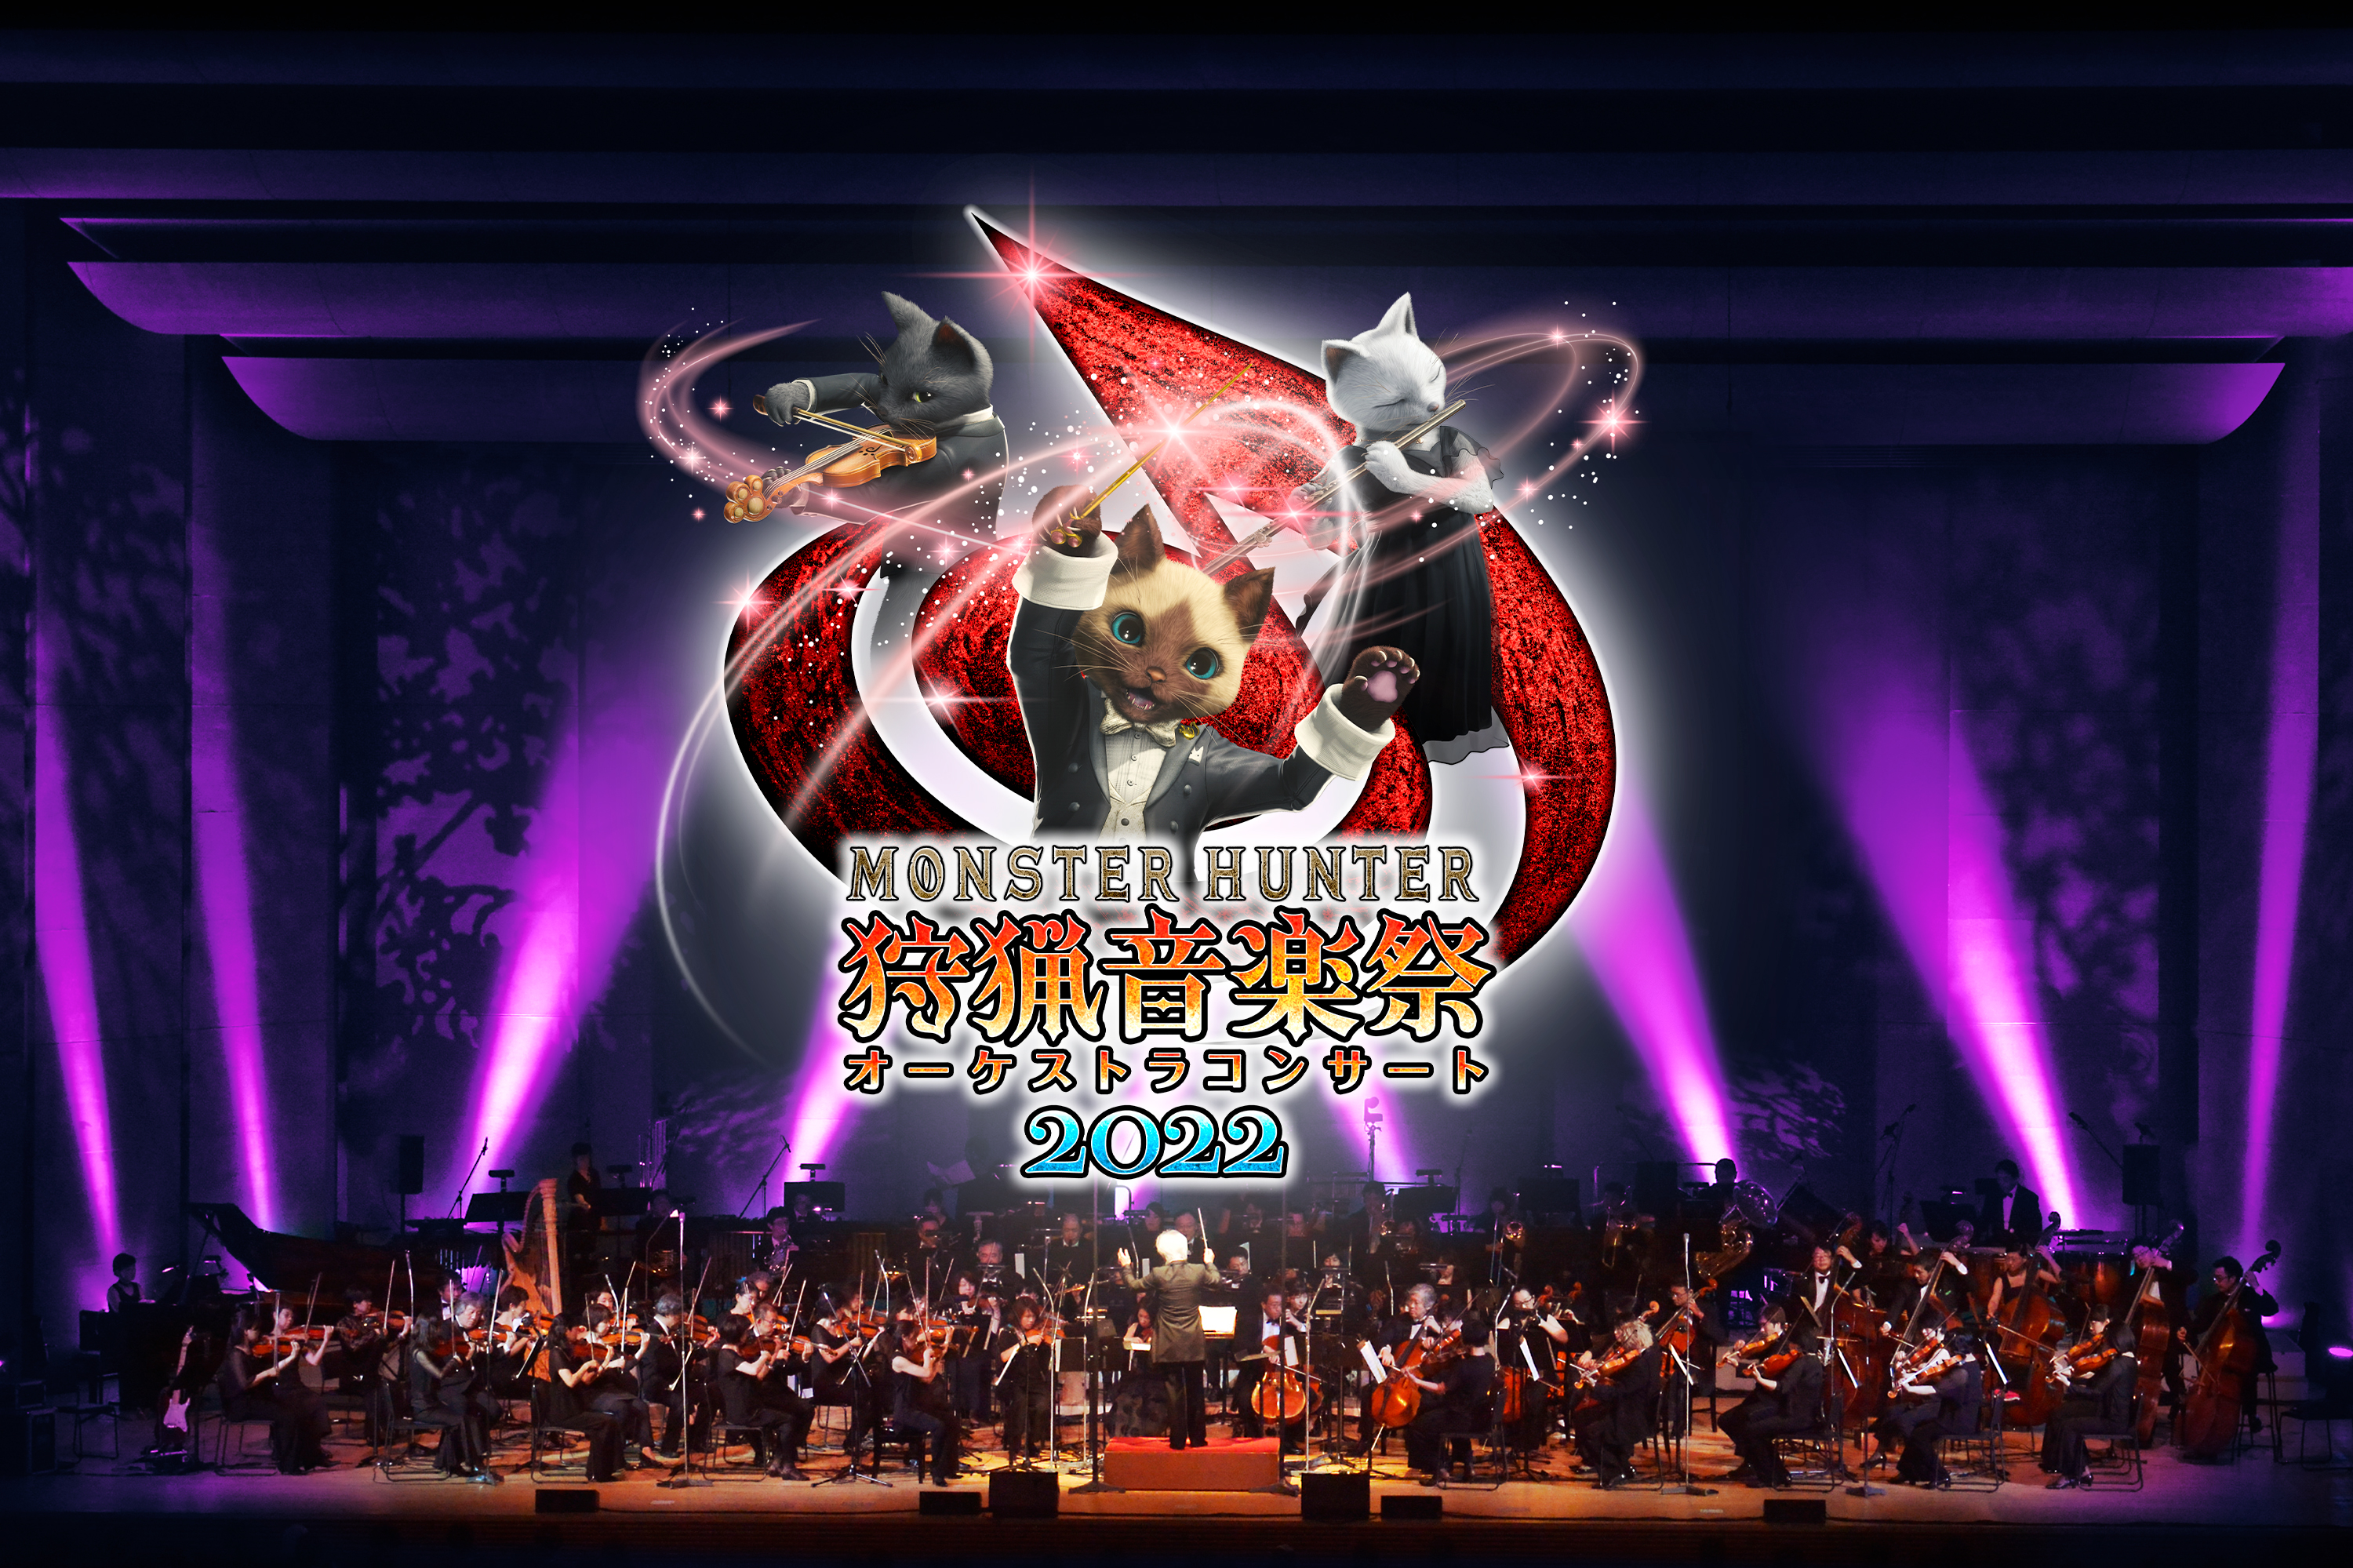 Monster Hunter Orchestra Concert／狩猟音楽祭 (@MH_Orchestra) / X